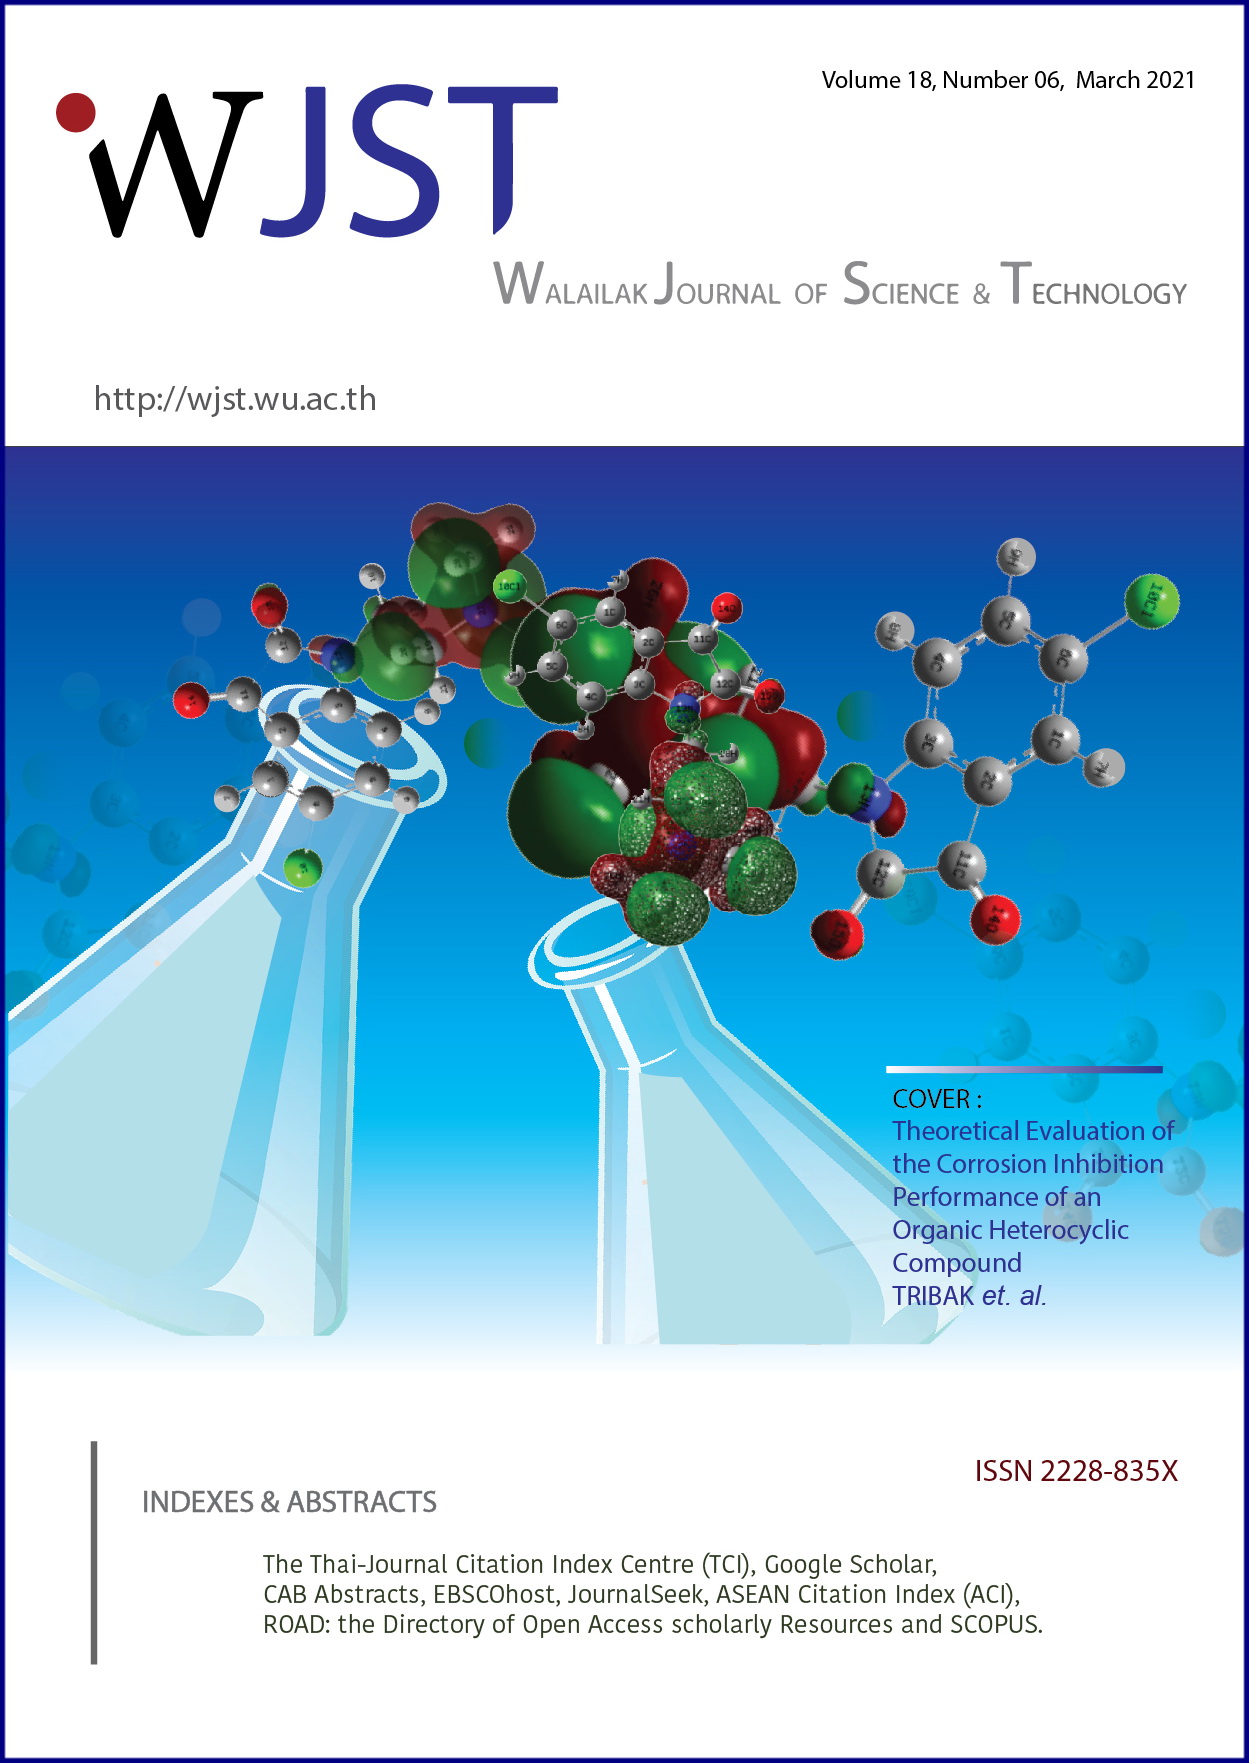 					View Vol. 18 No. 6 (2021): Walailak Journal of Science and Technology Volume 18, Number 6, 15 March 2021
				